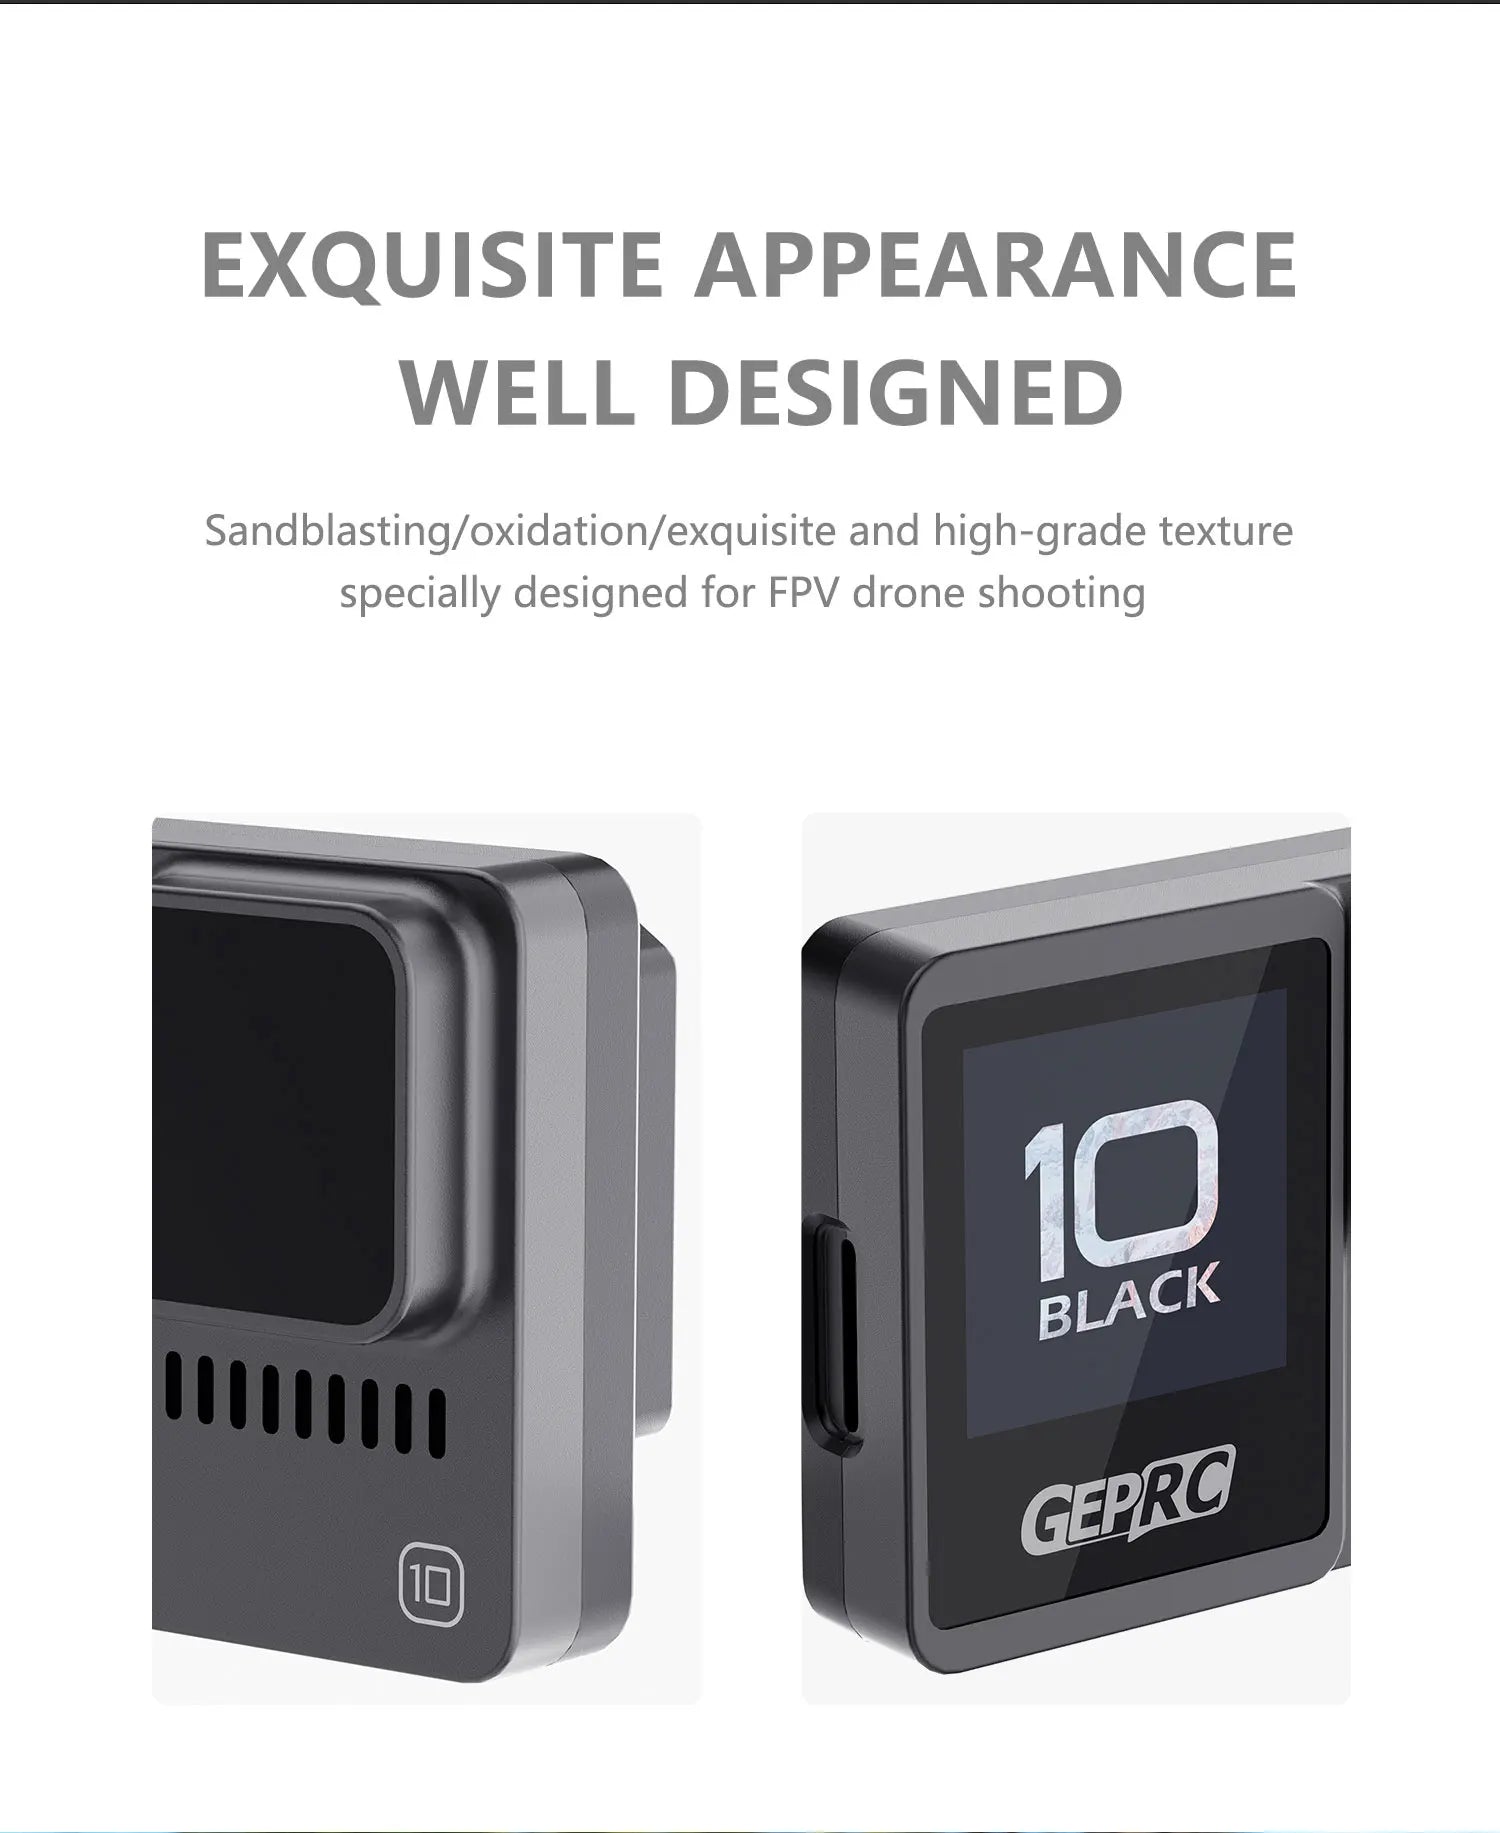 GEPRC Naked Camera, EXQUISITE APPEARANCE WELL DESIGNED Sandblasting/oxidation